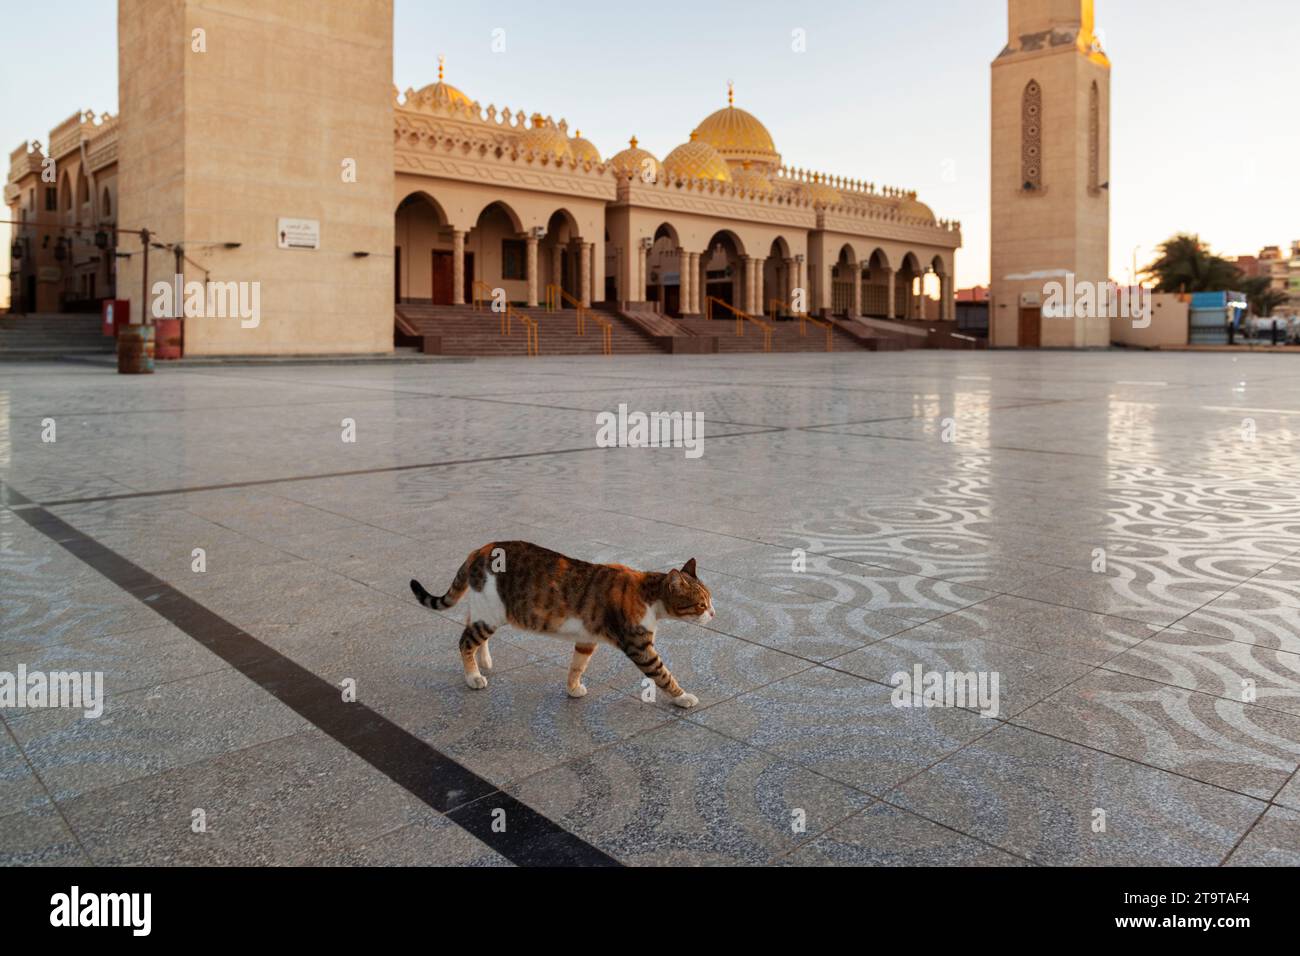 Stray cat walking at the empty square in from of Al Mina Mosque in Hurghada, Egypt Stock Photo